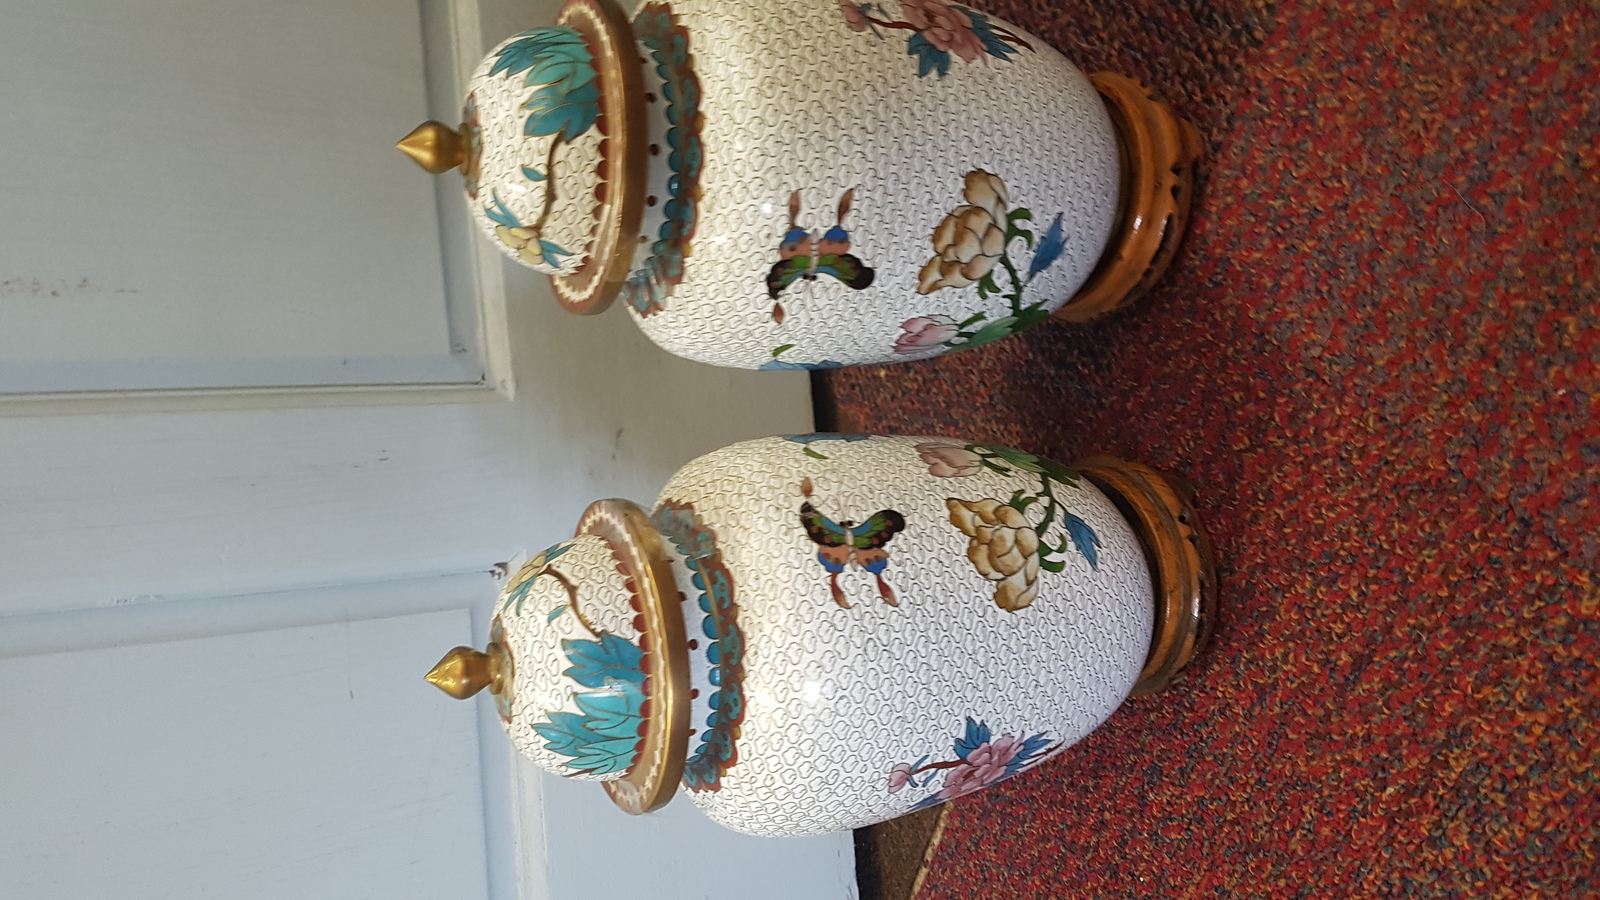 A Pair Of 20th Century Chinese Cloisonne Lidded Vases Decorated With Chrysanthemum